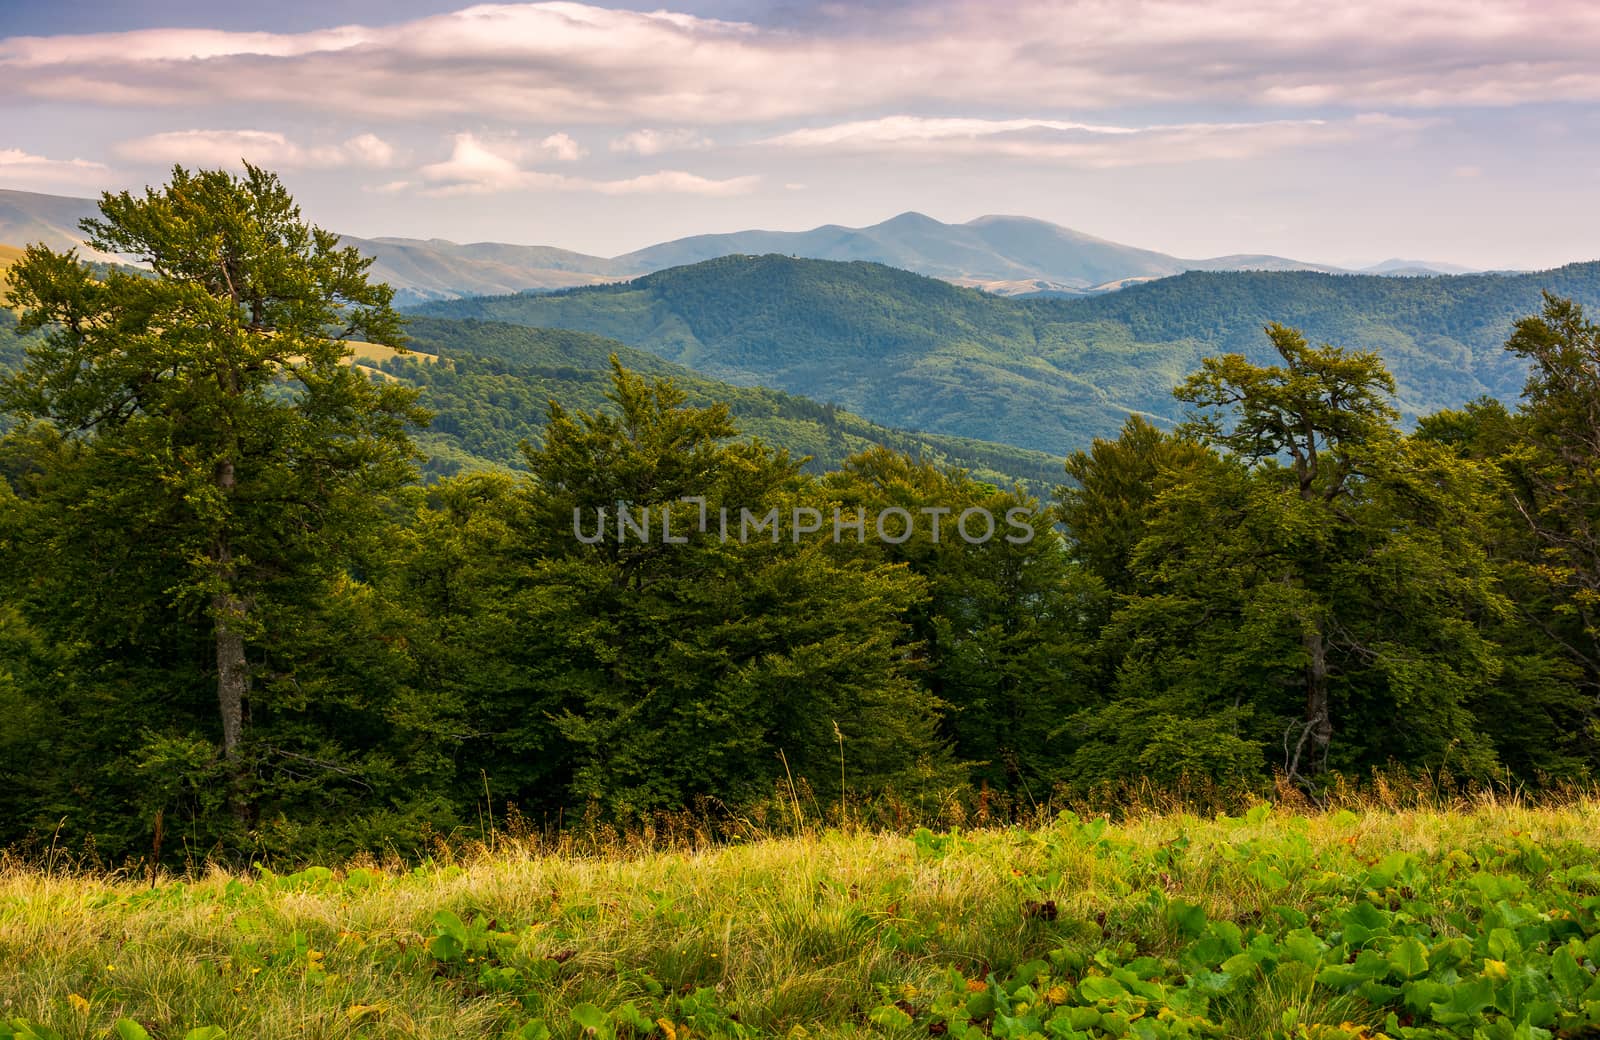 beech forest of Carpathian mountains in afternoon. lovely nature scenery in summertime. Svydovets mountain ridge in the distance under the cloudy sky